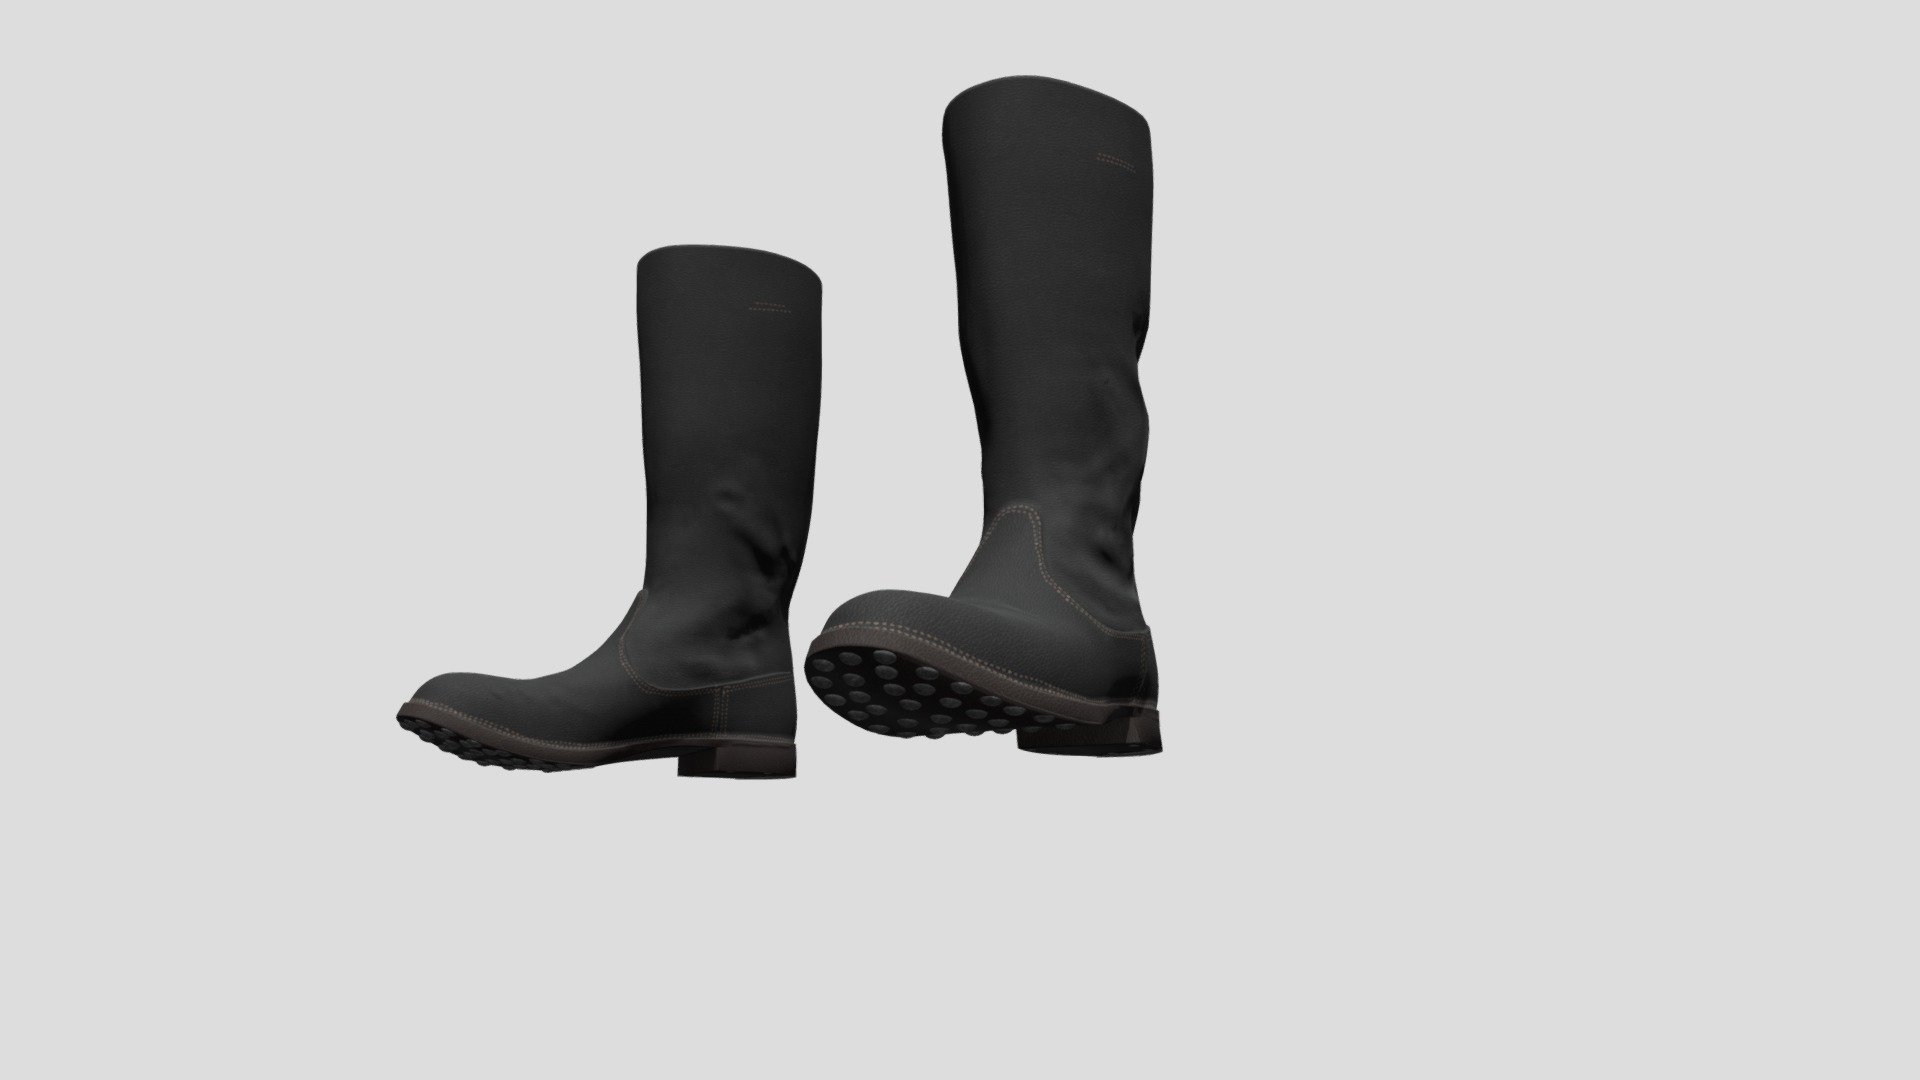 Hi,

this is my first model on Sketchfab. Tell me what do you think about it?

I make it around 5 hours in Blender.

I hope you want more WW II German stuff.

Have a great day everyone.

PS. If you want you can download :) - WW II German Jack boots - Download Free 3D model by PL_historyfan_K 3d model